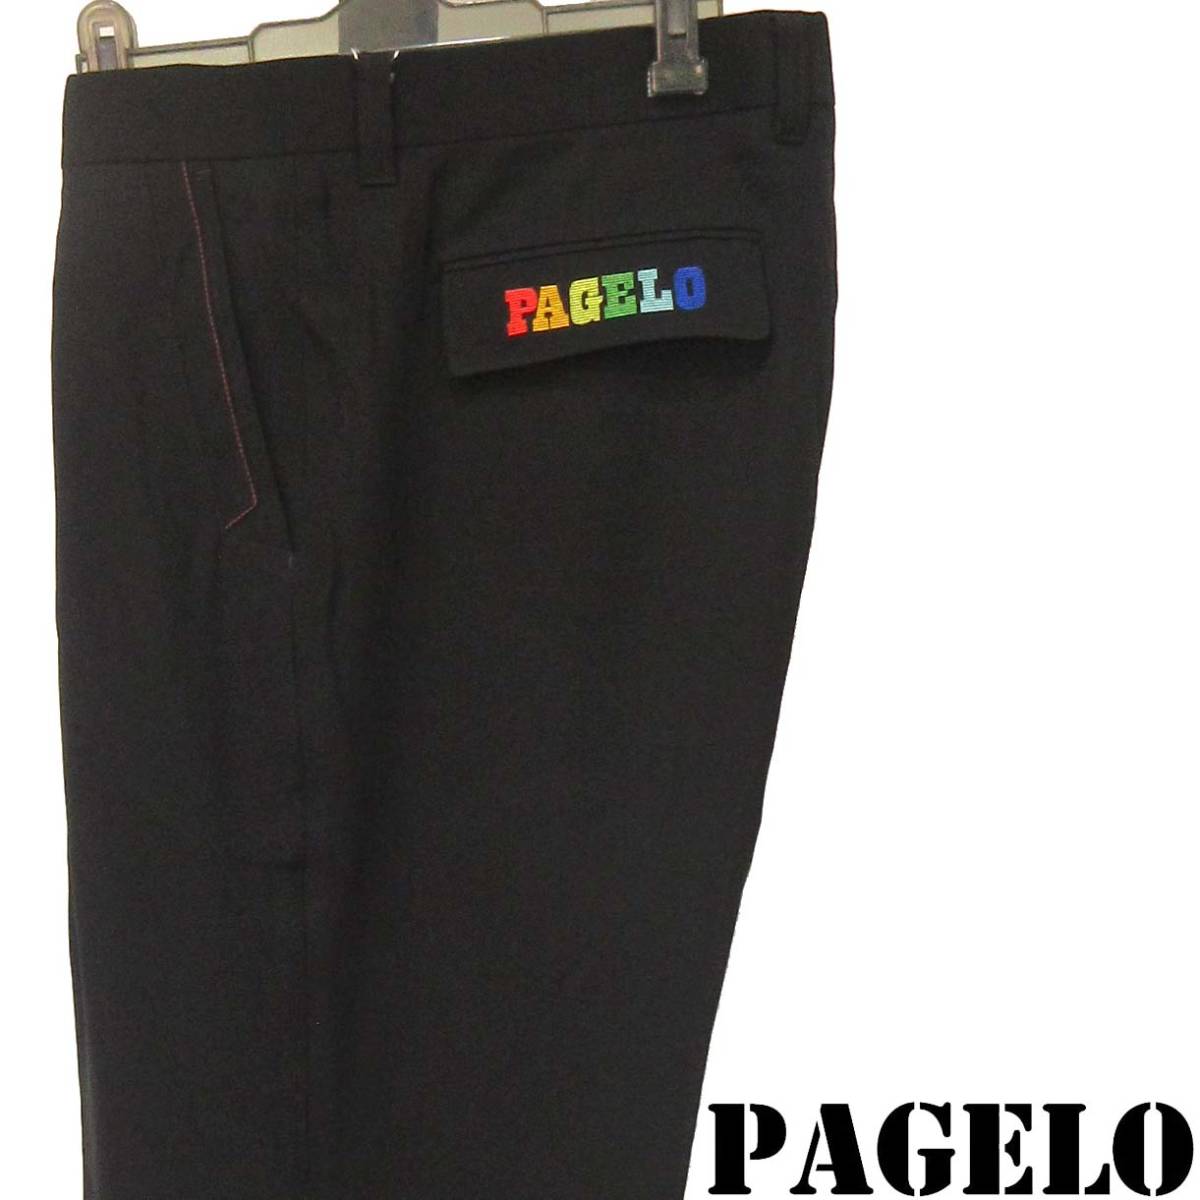 ★PAGELO★SALE タック付きスラックス【黒W100㎝】秋冬モデル P5513107 パジェロ